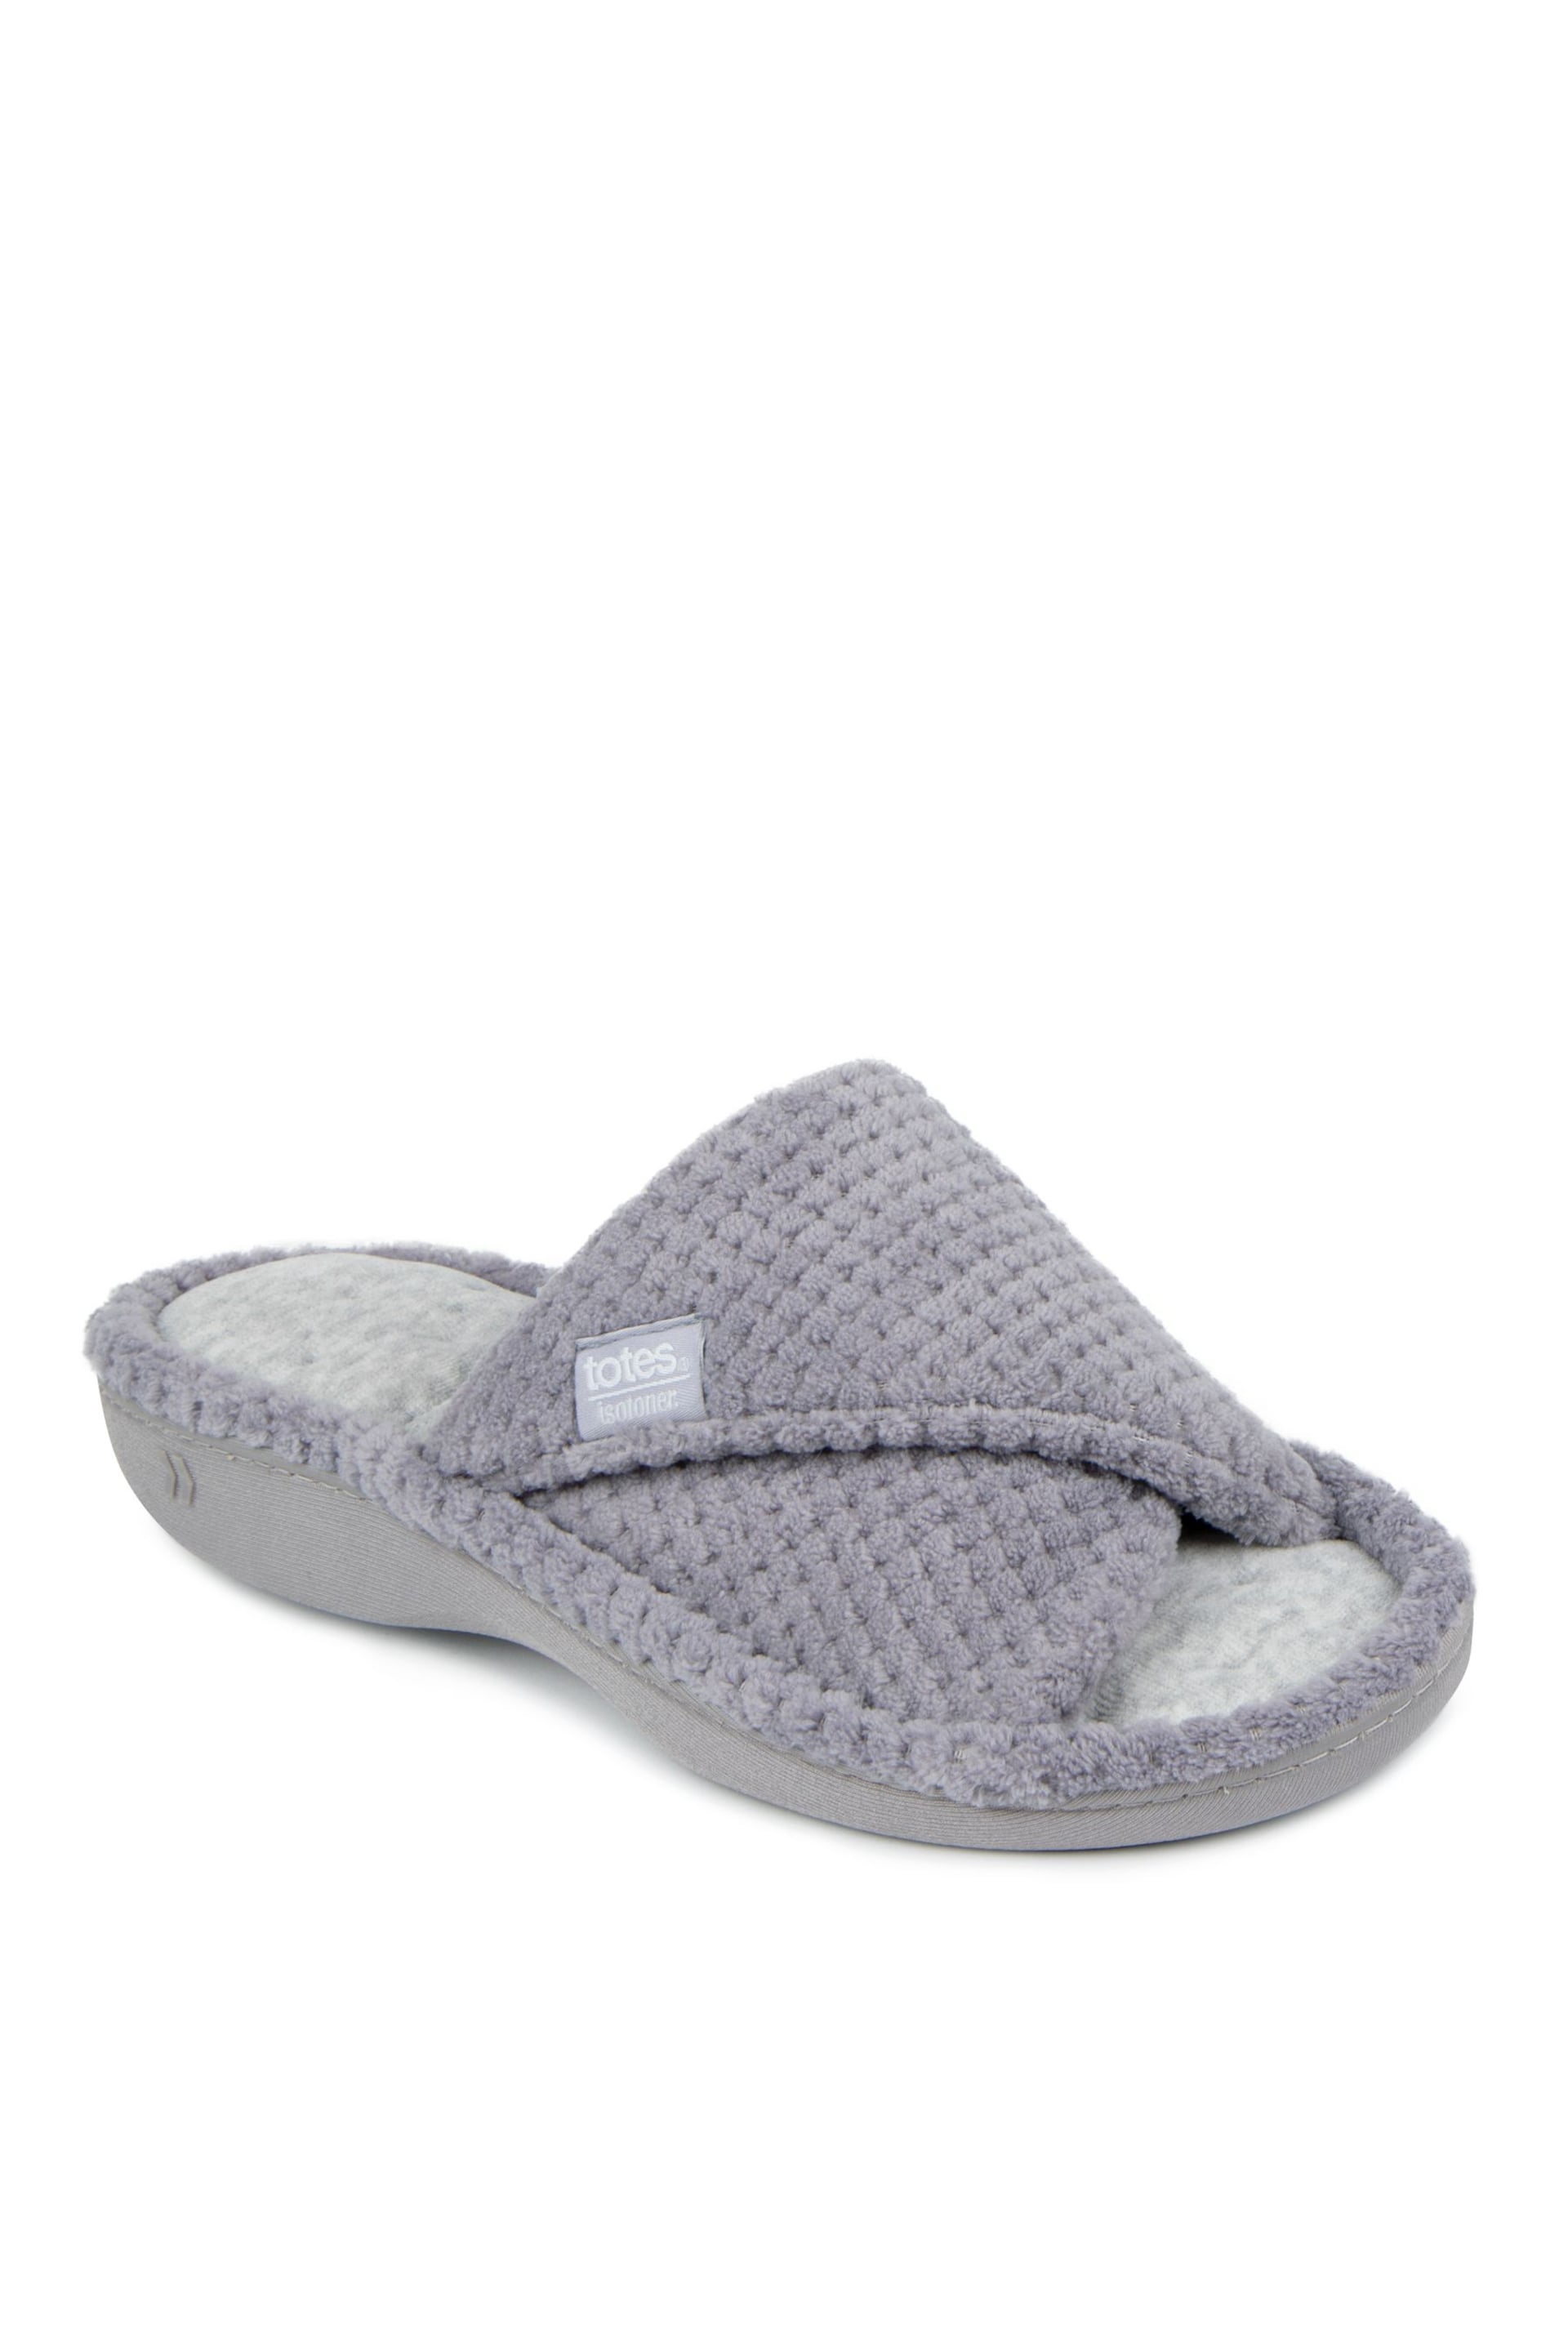 Totes Grey Popcorn Turnover Open Toe Slippers - Image 3 of 5